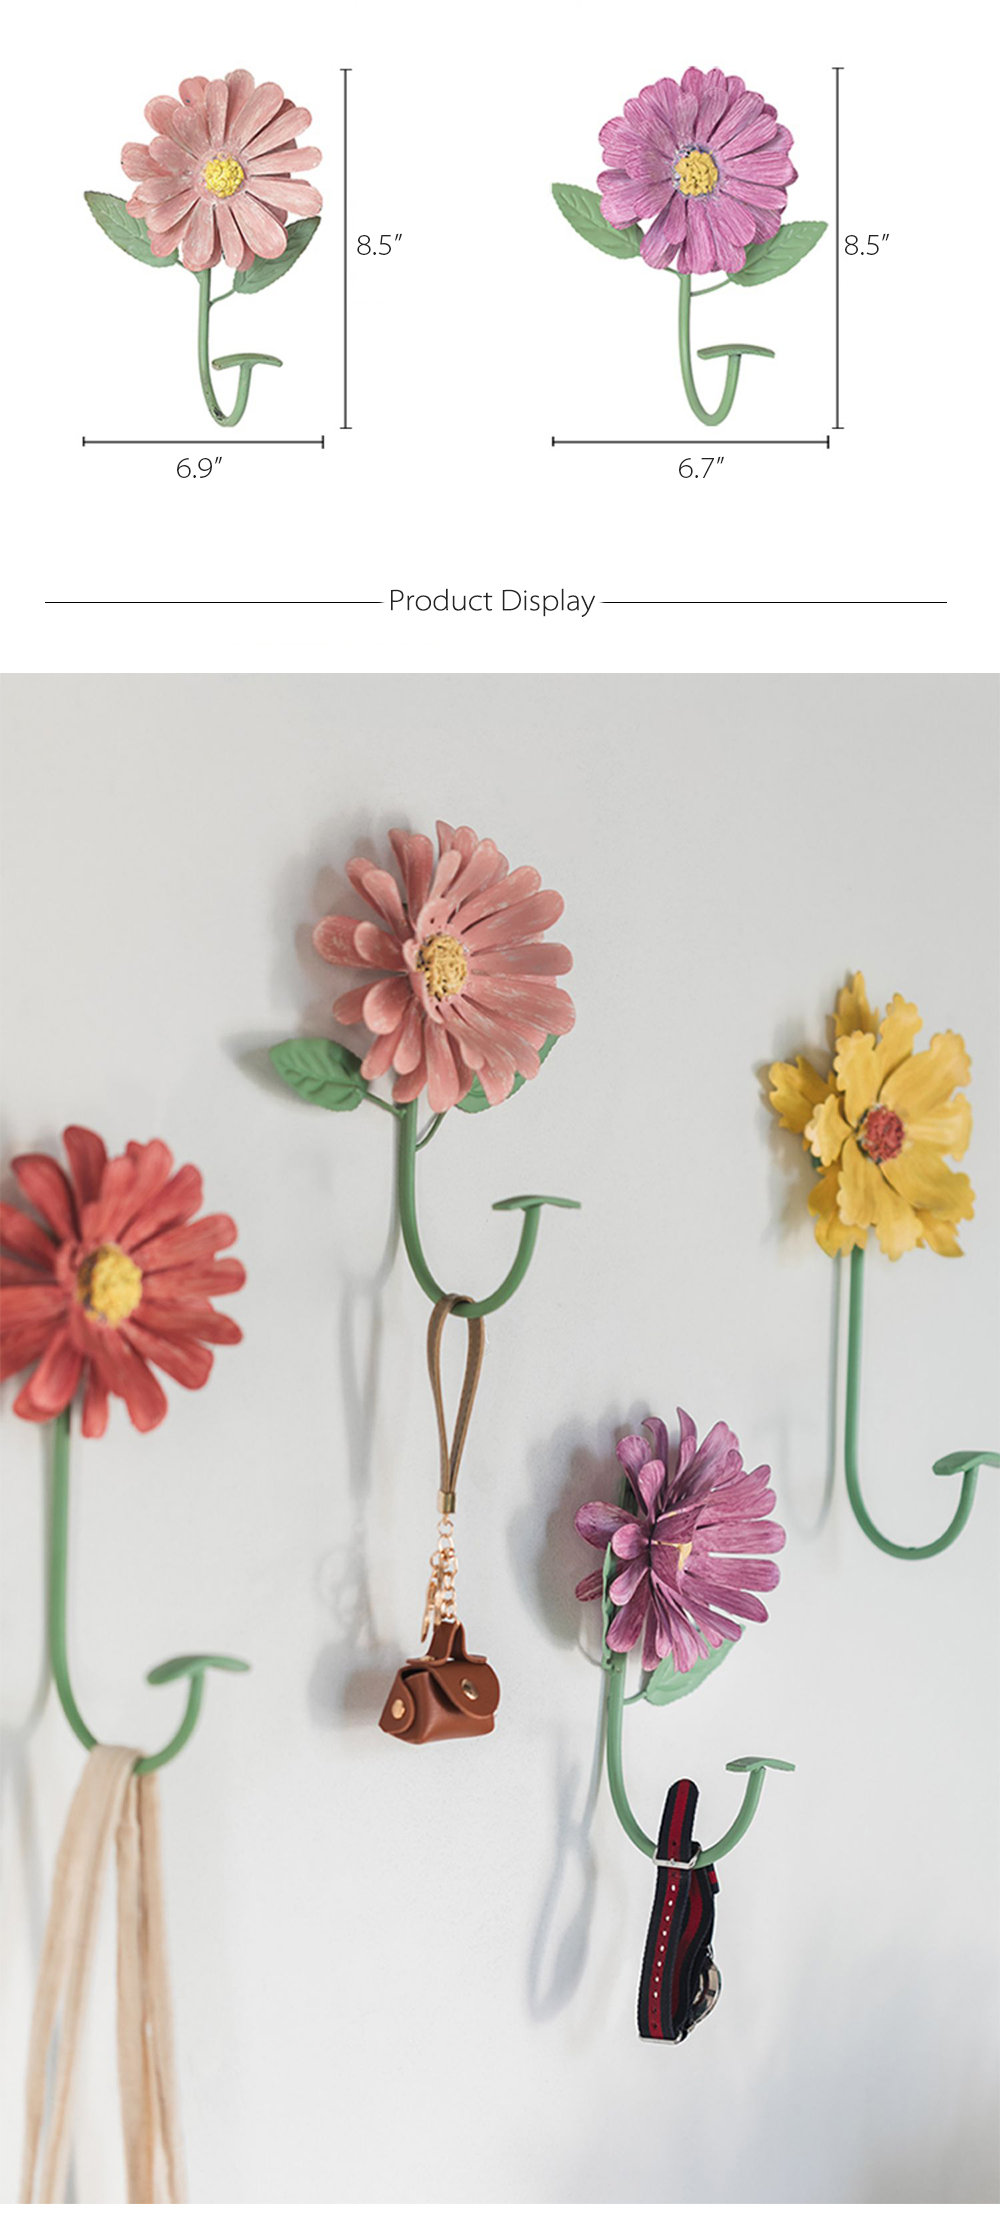  Tricune Vintage Flower Shaped Decorative Wall Hooks